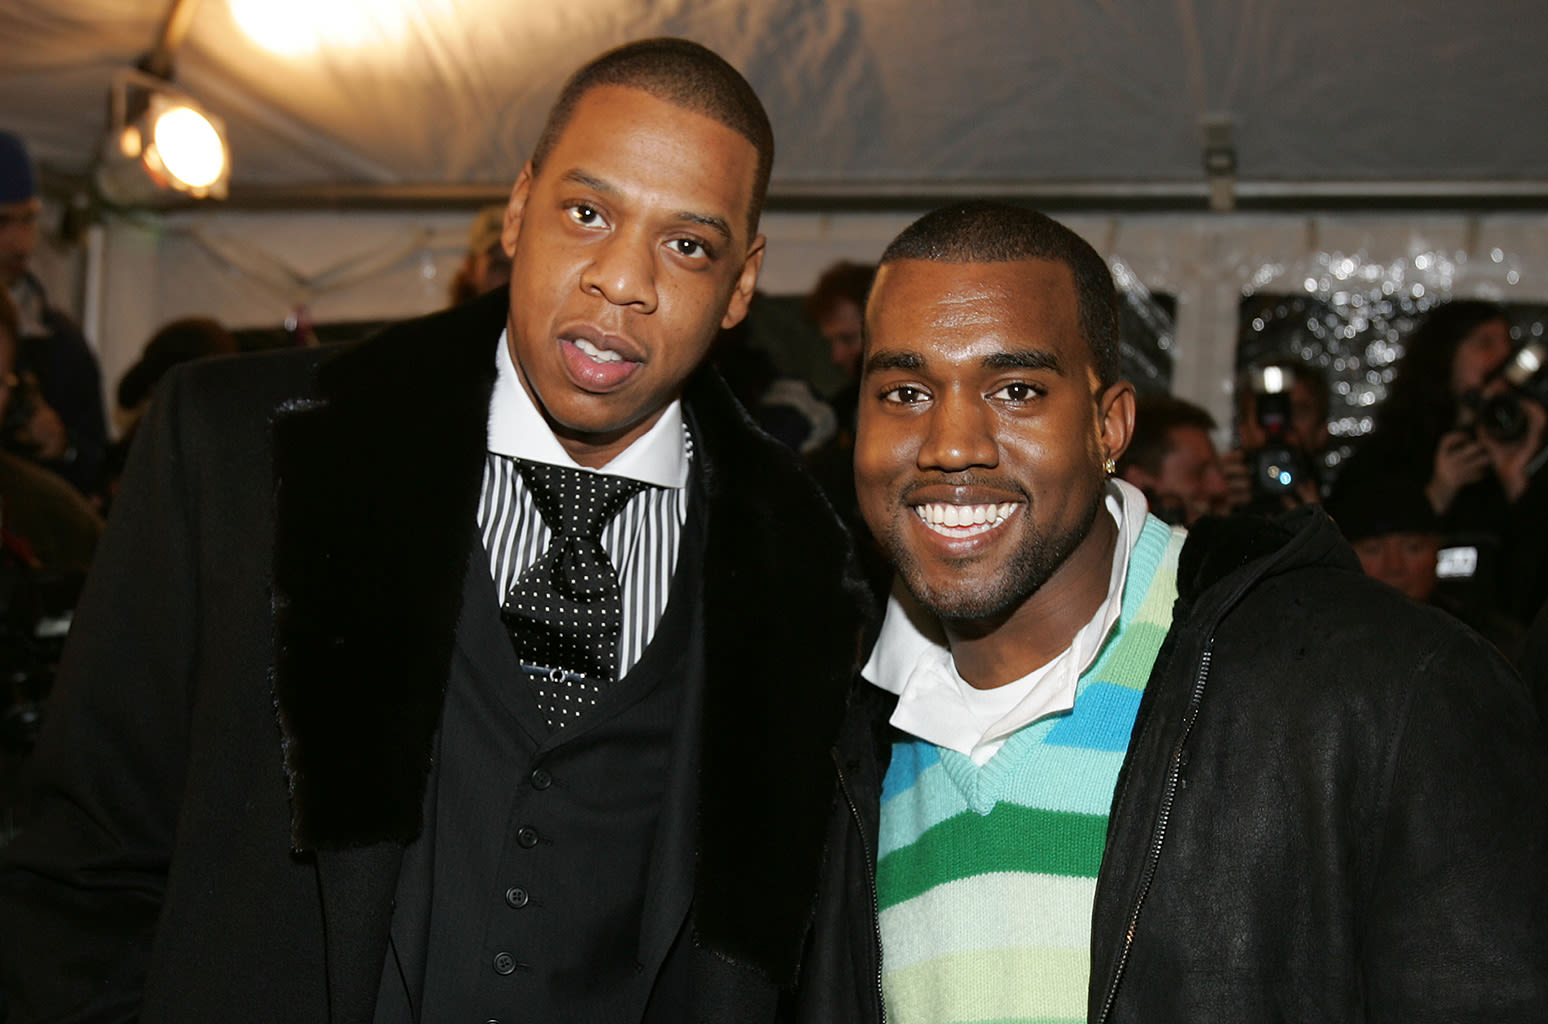 Ye & Jay-Z’s ‘No Church in the Wild’ Soundtracks ‘Gladiator II’ Trailer: See How Fans Are Reacting